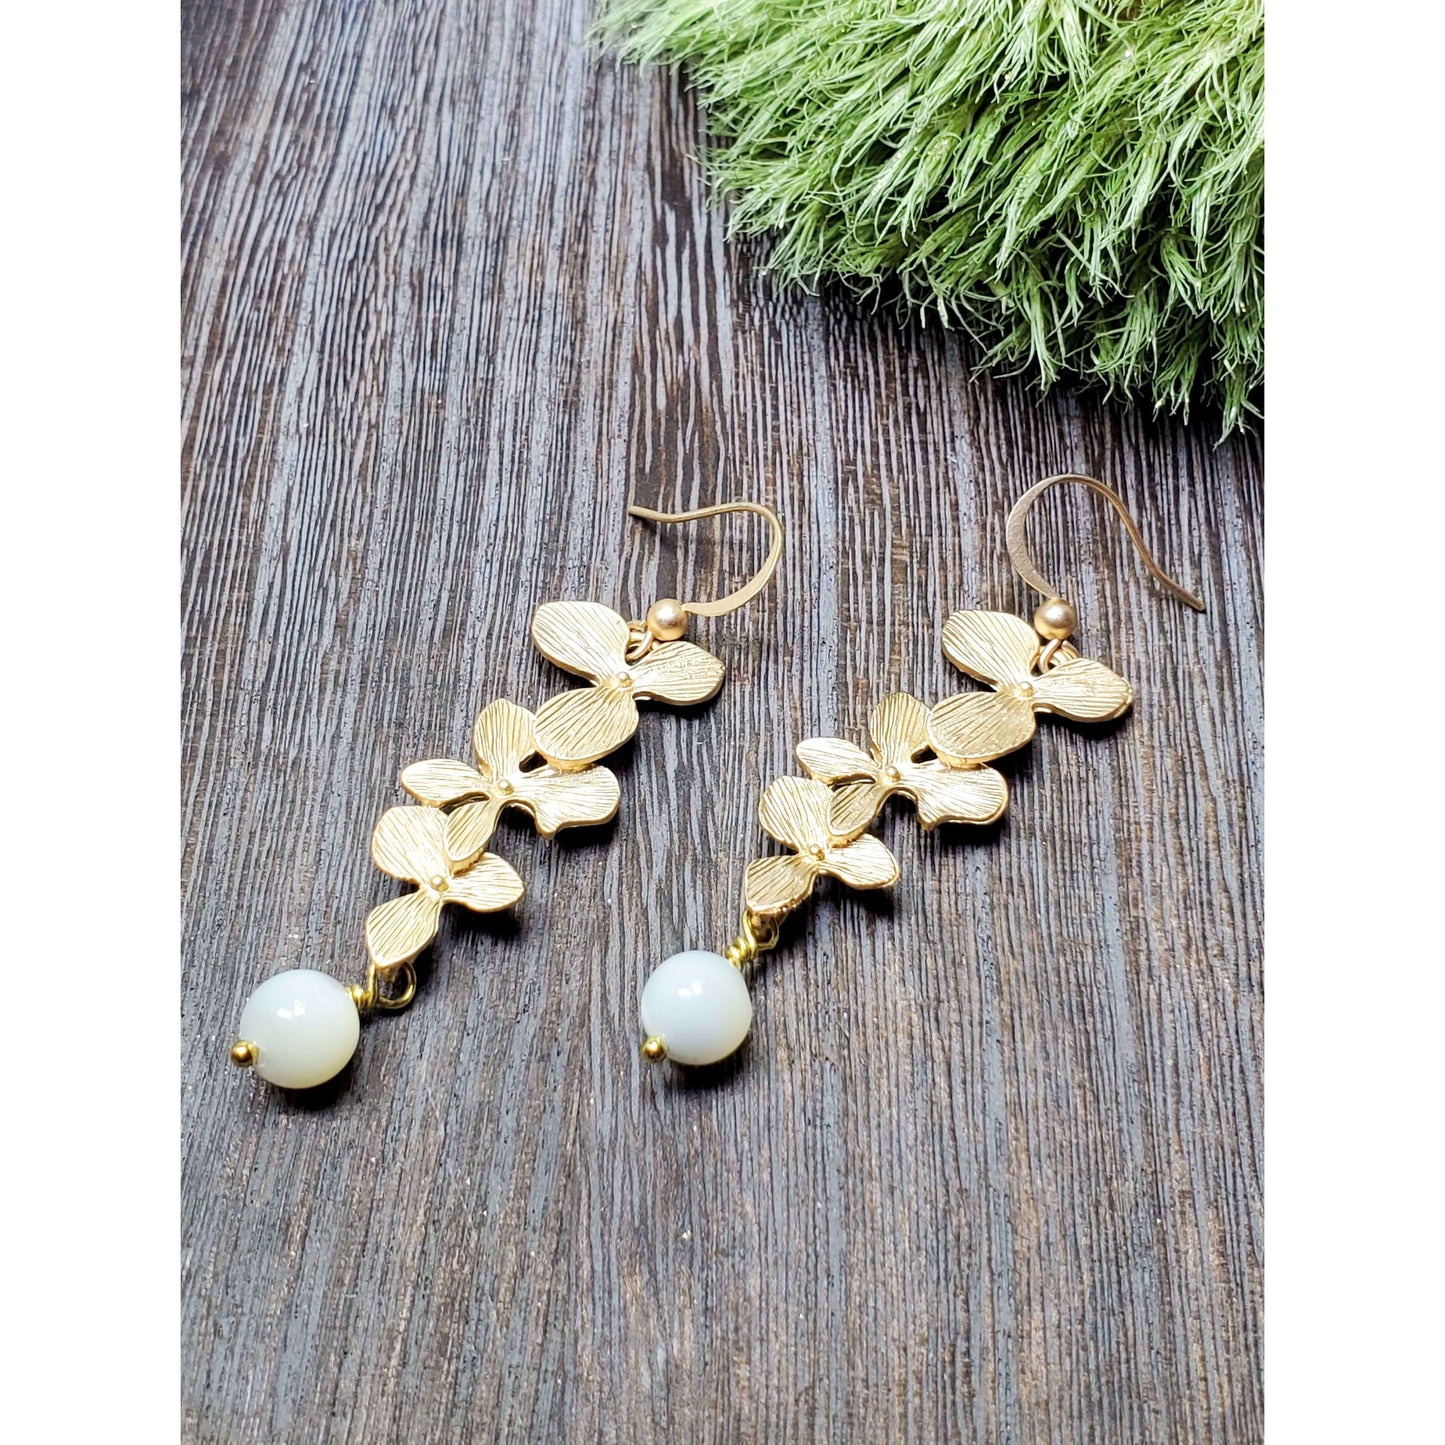 Cascading Orchid Earrings - Gold-White Shell - Nicki Lynn Jewelry